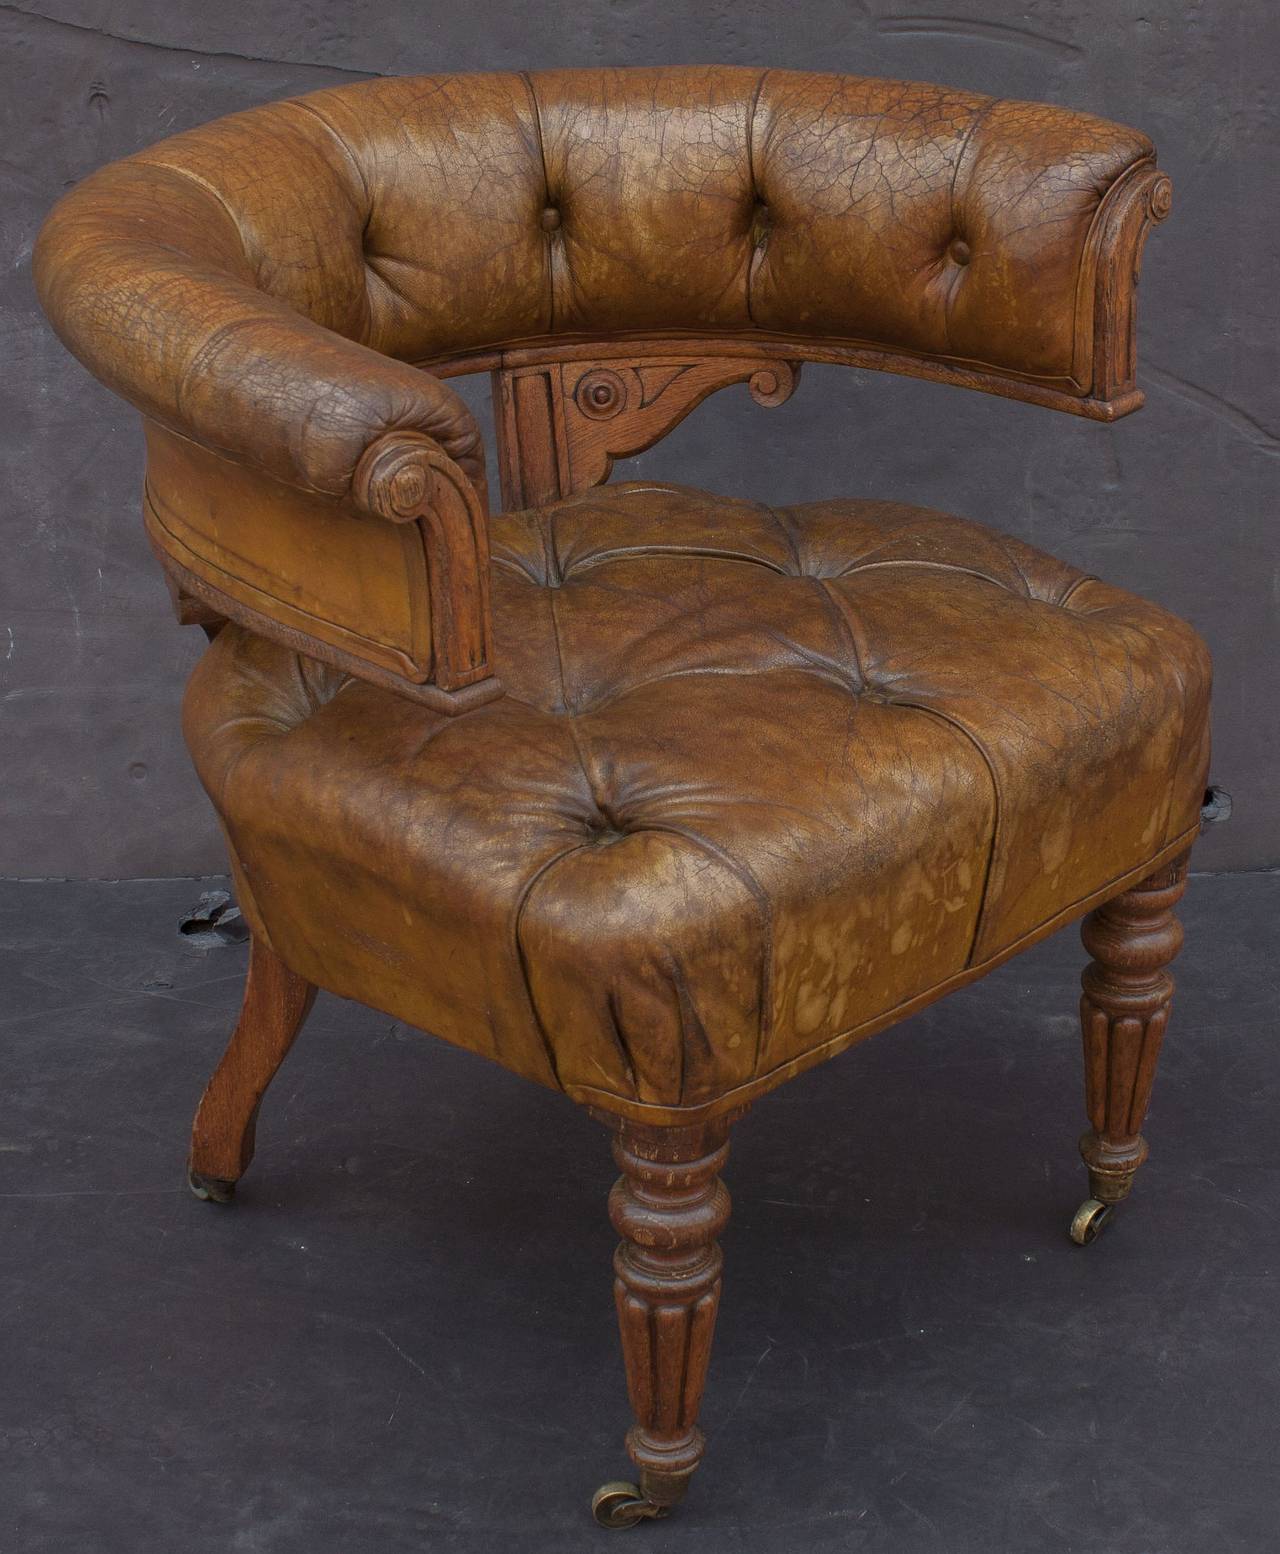 A fine English desk chair of tufted leather and oak on rolling casters, featuring a roll-back arm with tufted-leather padding, mounted to a tufted-leather cushion seat and set upon a frame of turned legs.